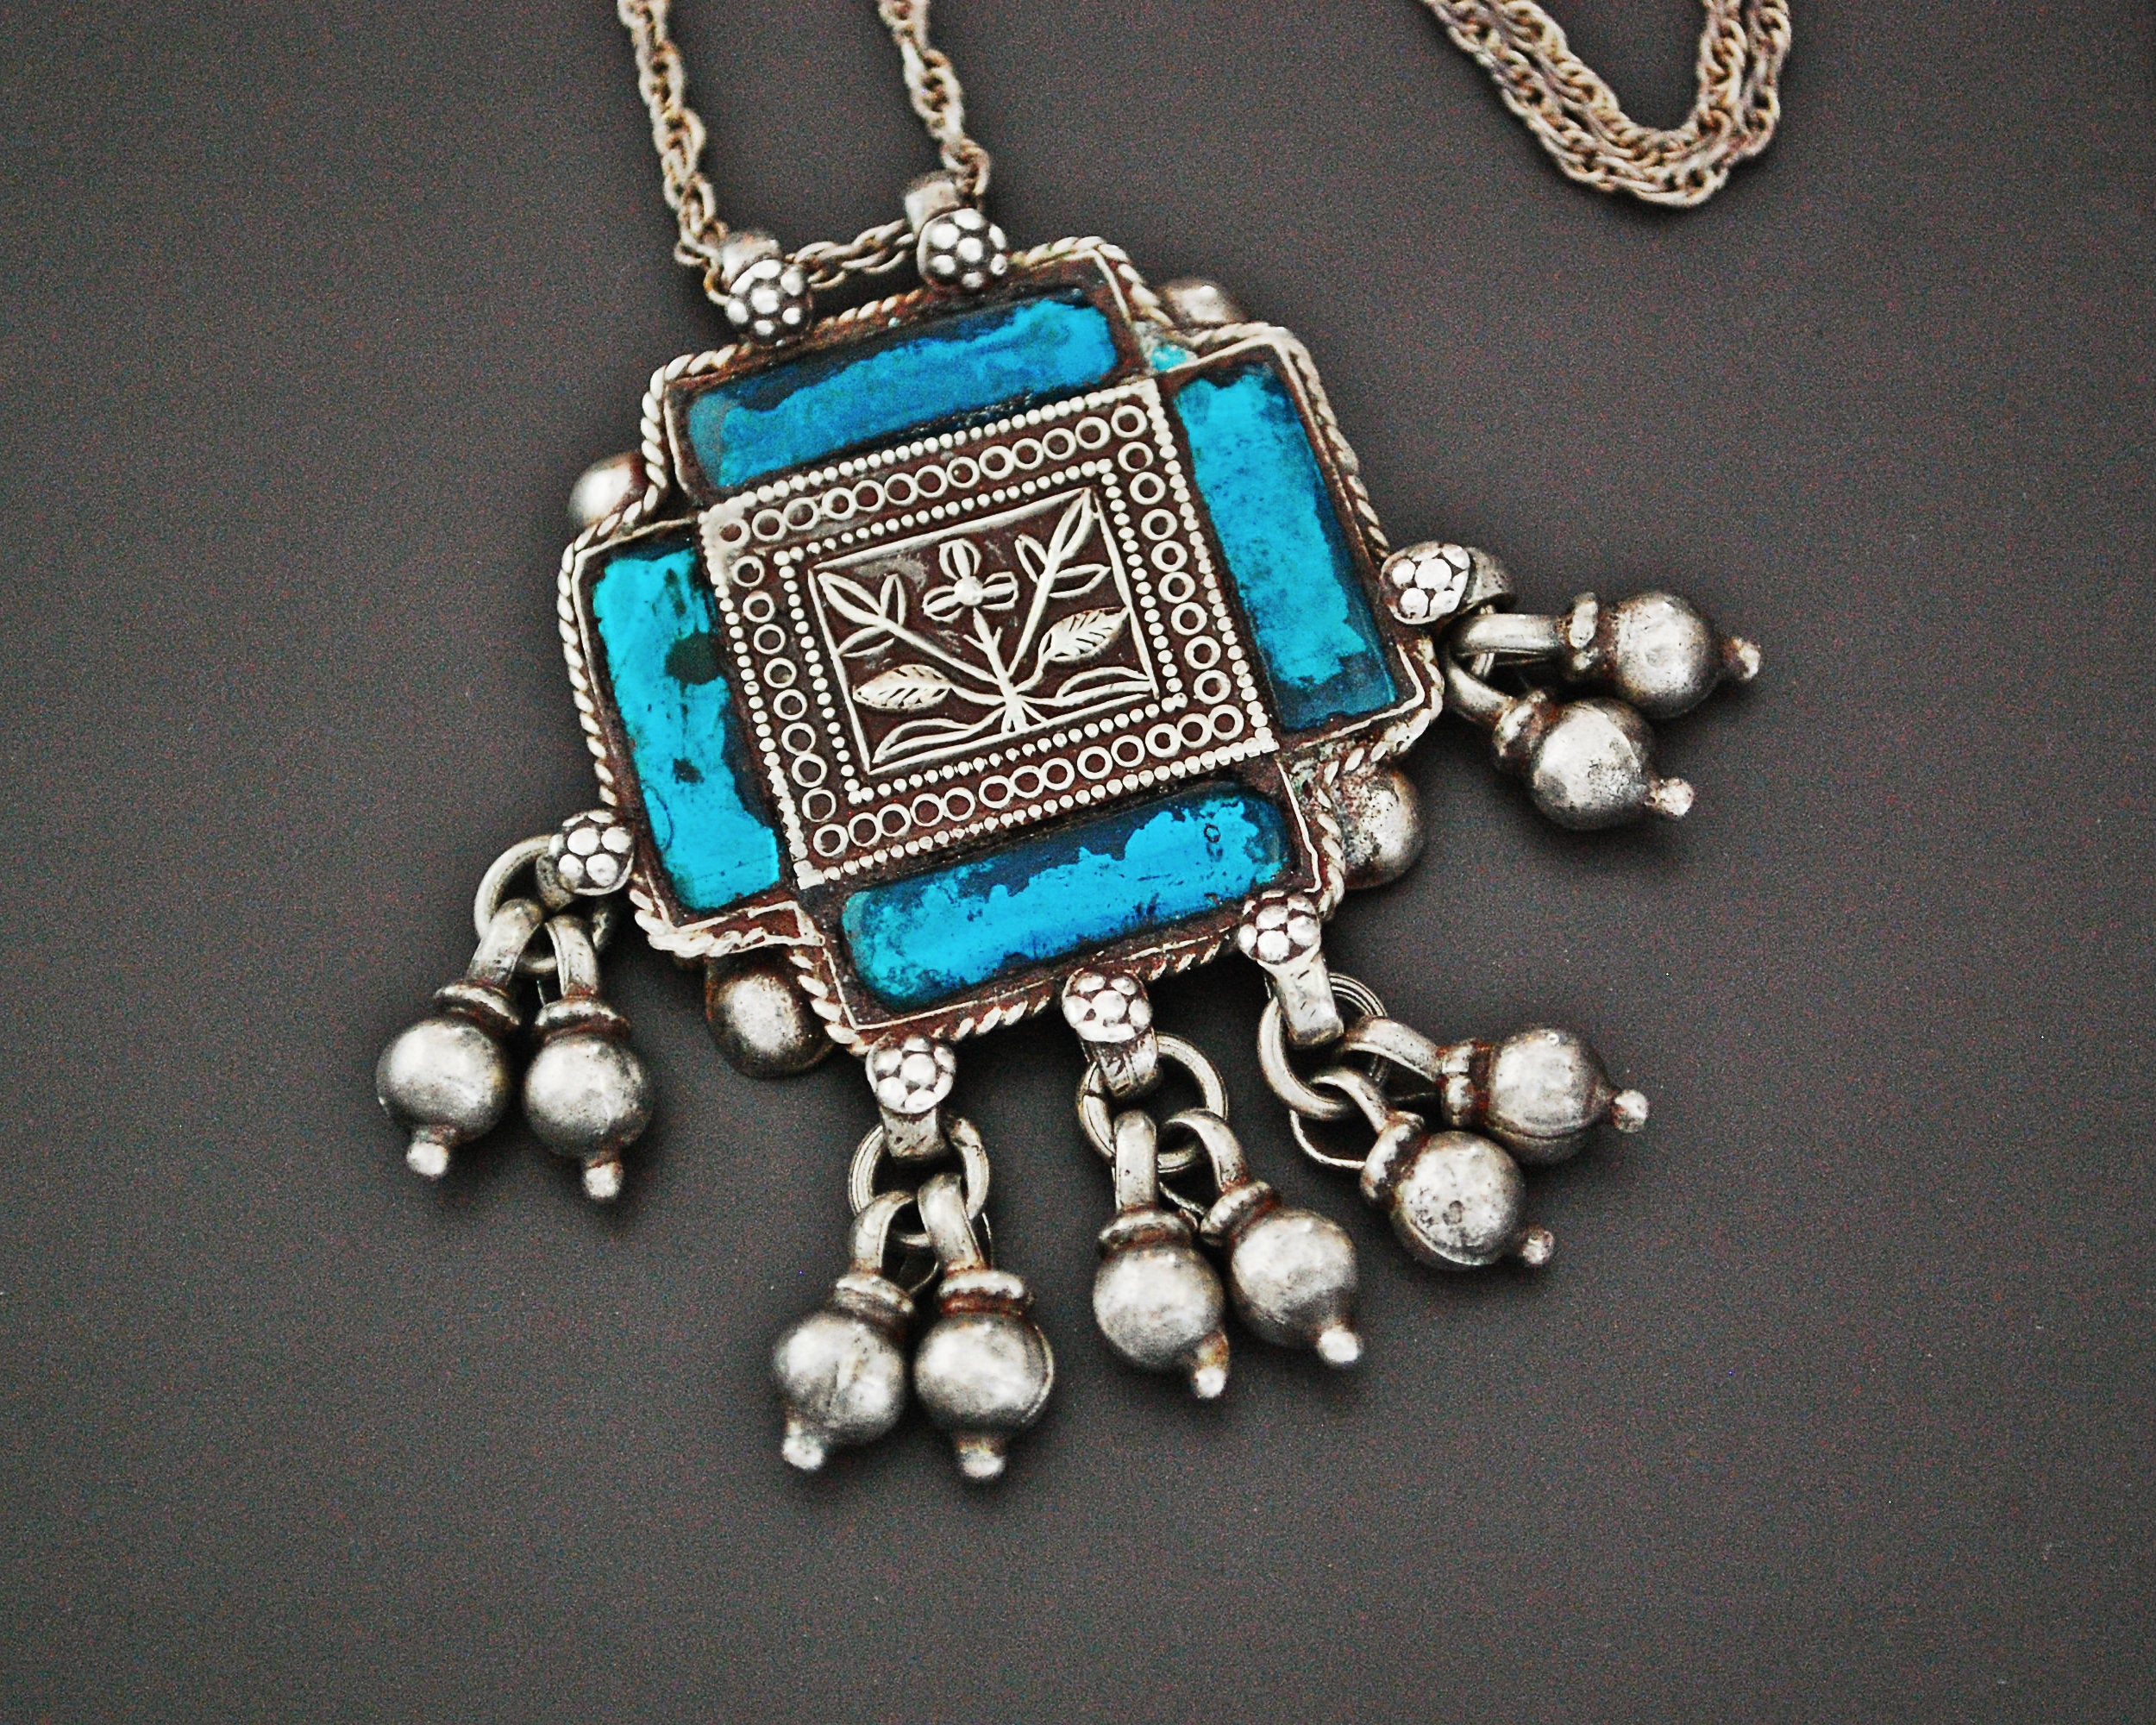 Rajasthani Silver Amulet with Glass and Bells Necklace